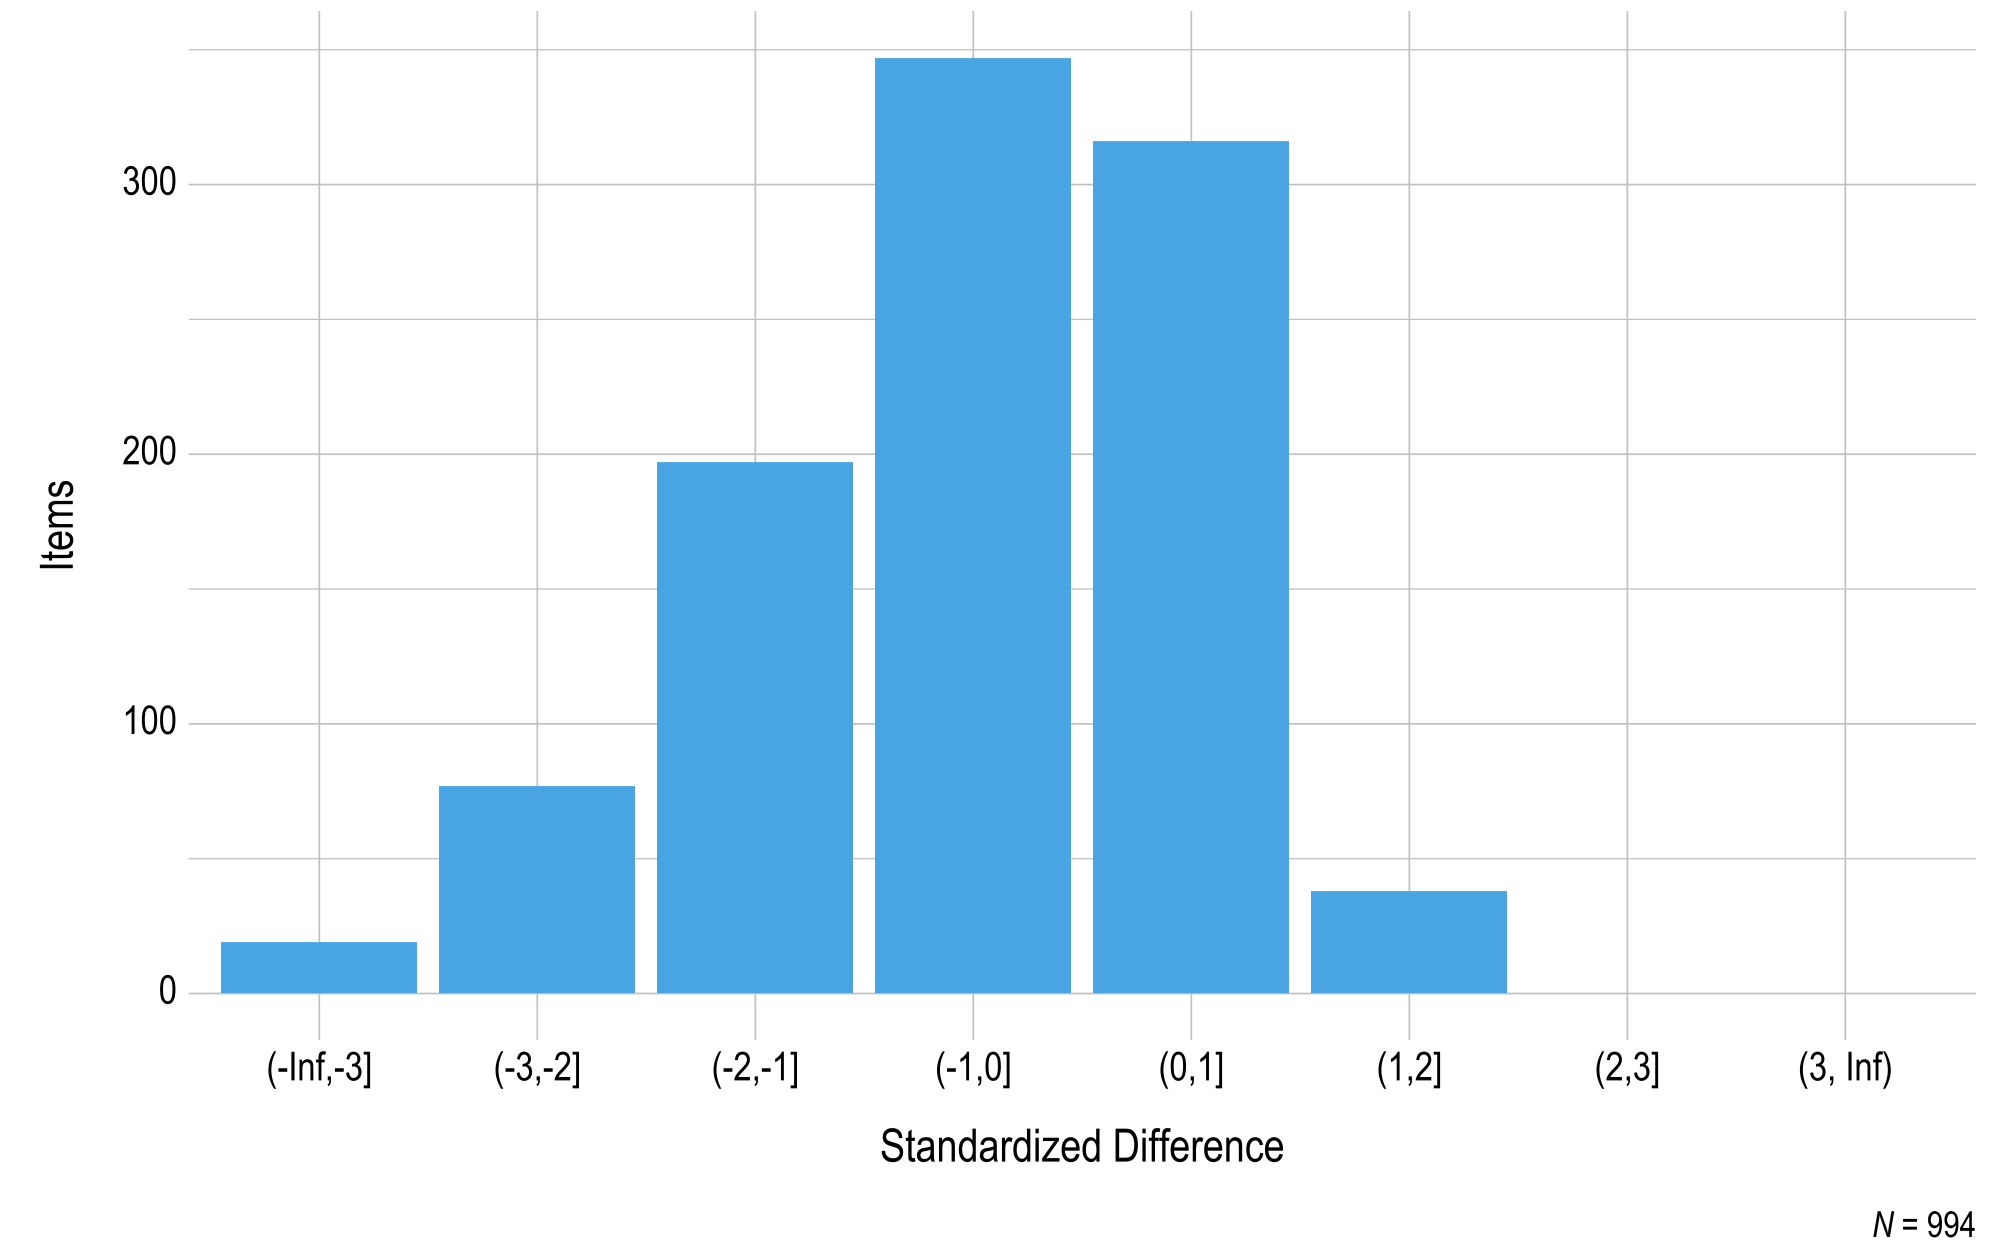 This figure contains a histogram displaying standardized difference on the x-axis and the number of English language arts field test items on the y-axis.